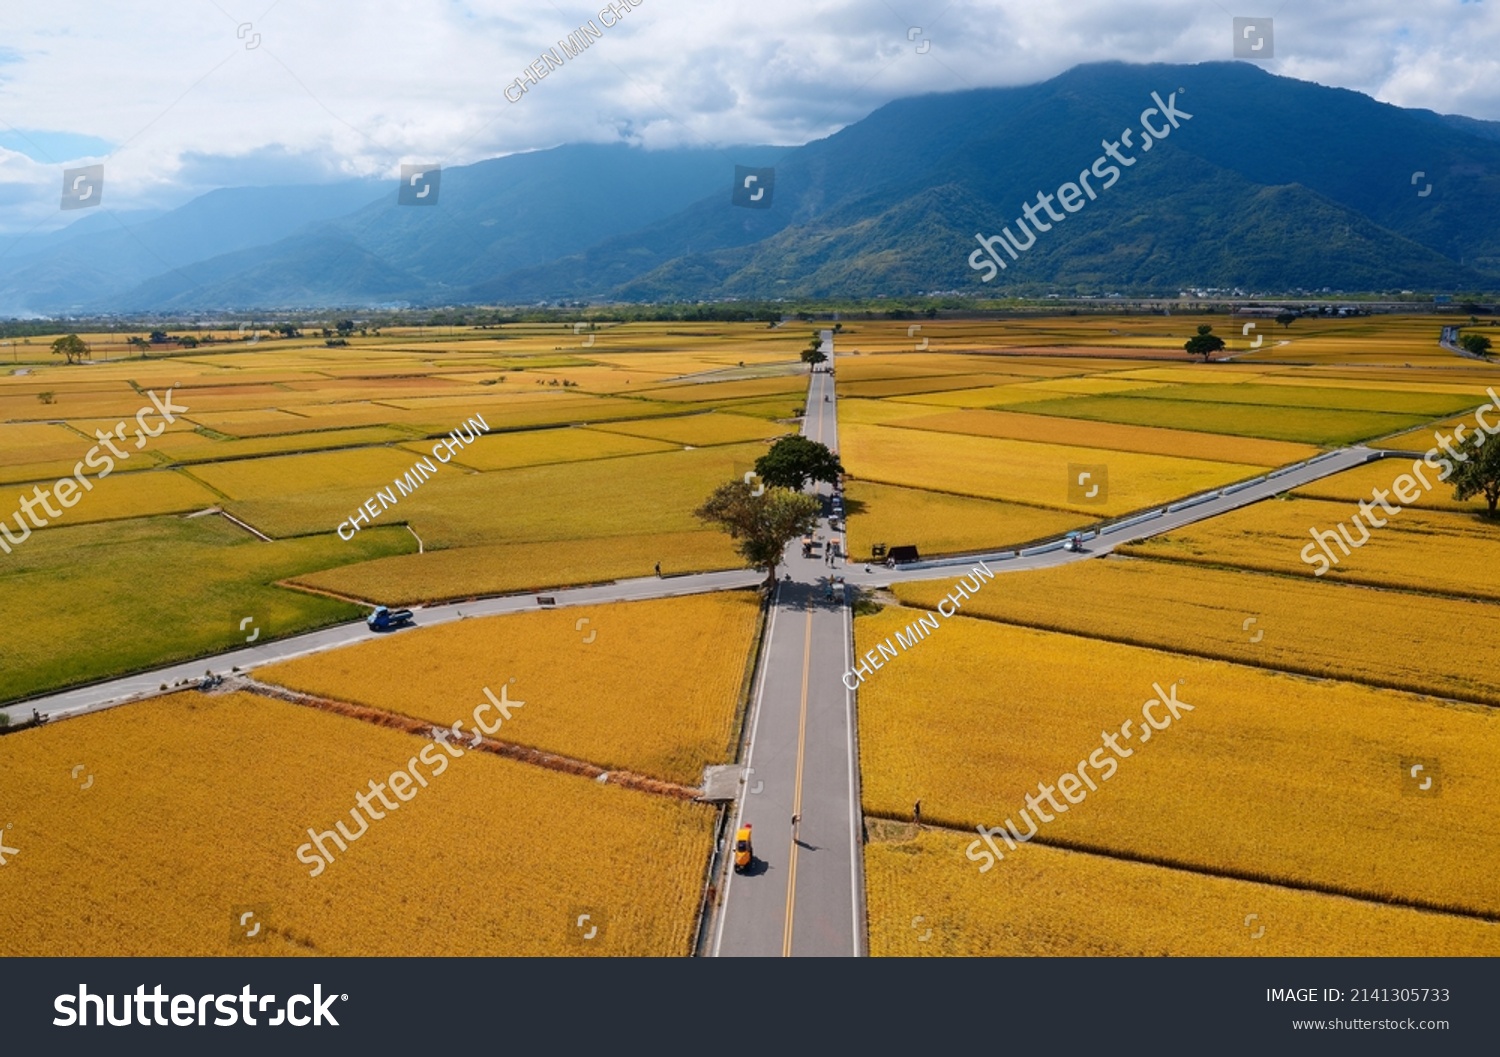 Aerial view of country roads crossing the beautiful patchwork field of rice paddies in the season of golden harvest, with mountains on the distant horizon, in Chishang Township, Taitung County, Taiwan #2141305733